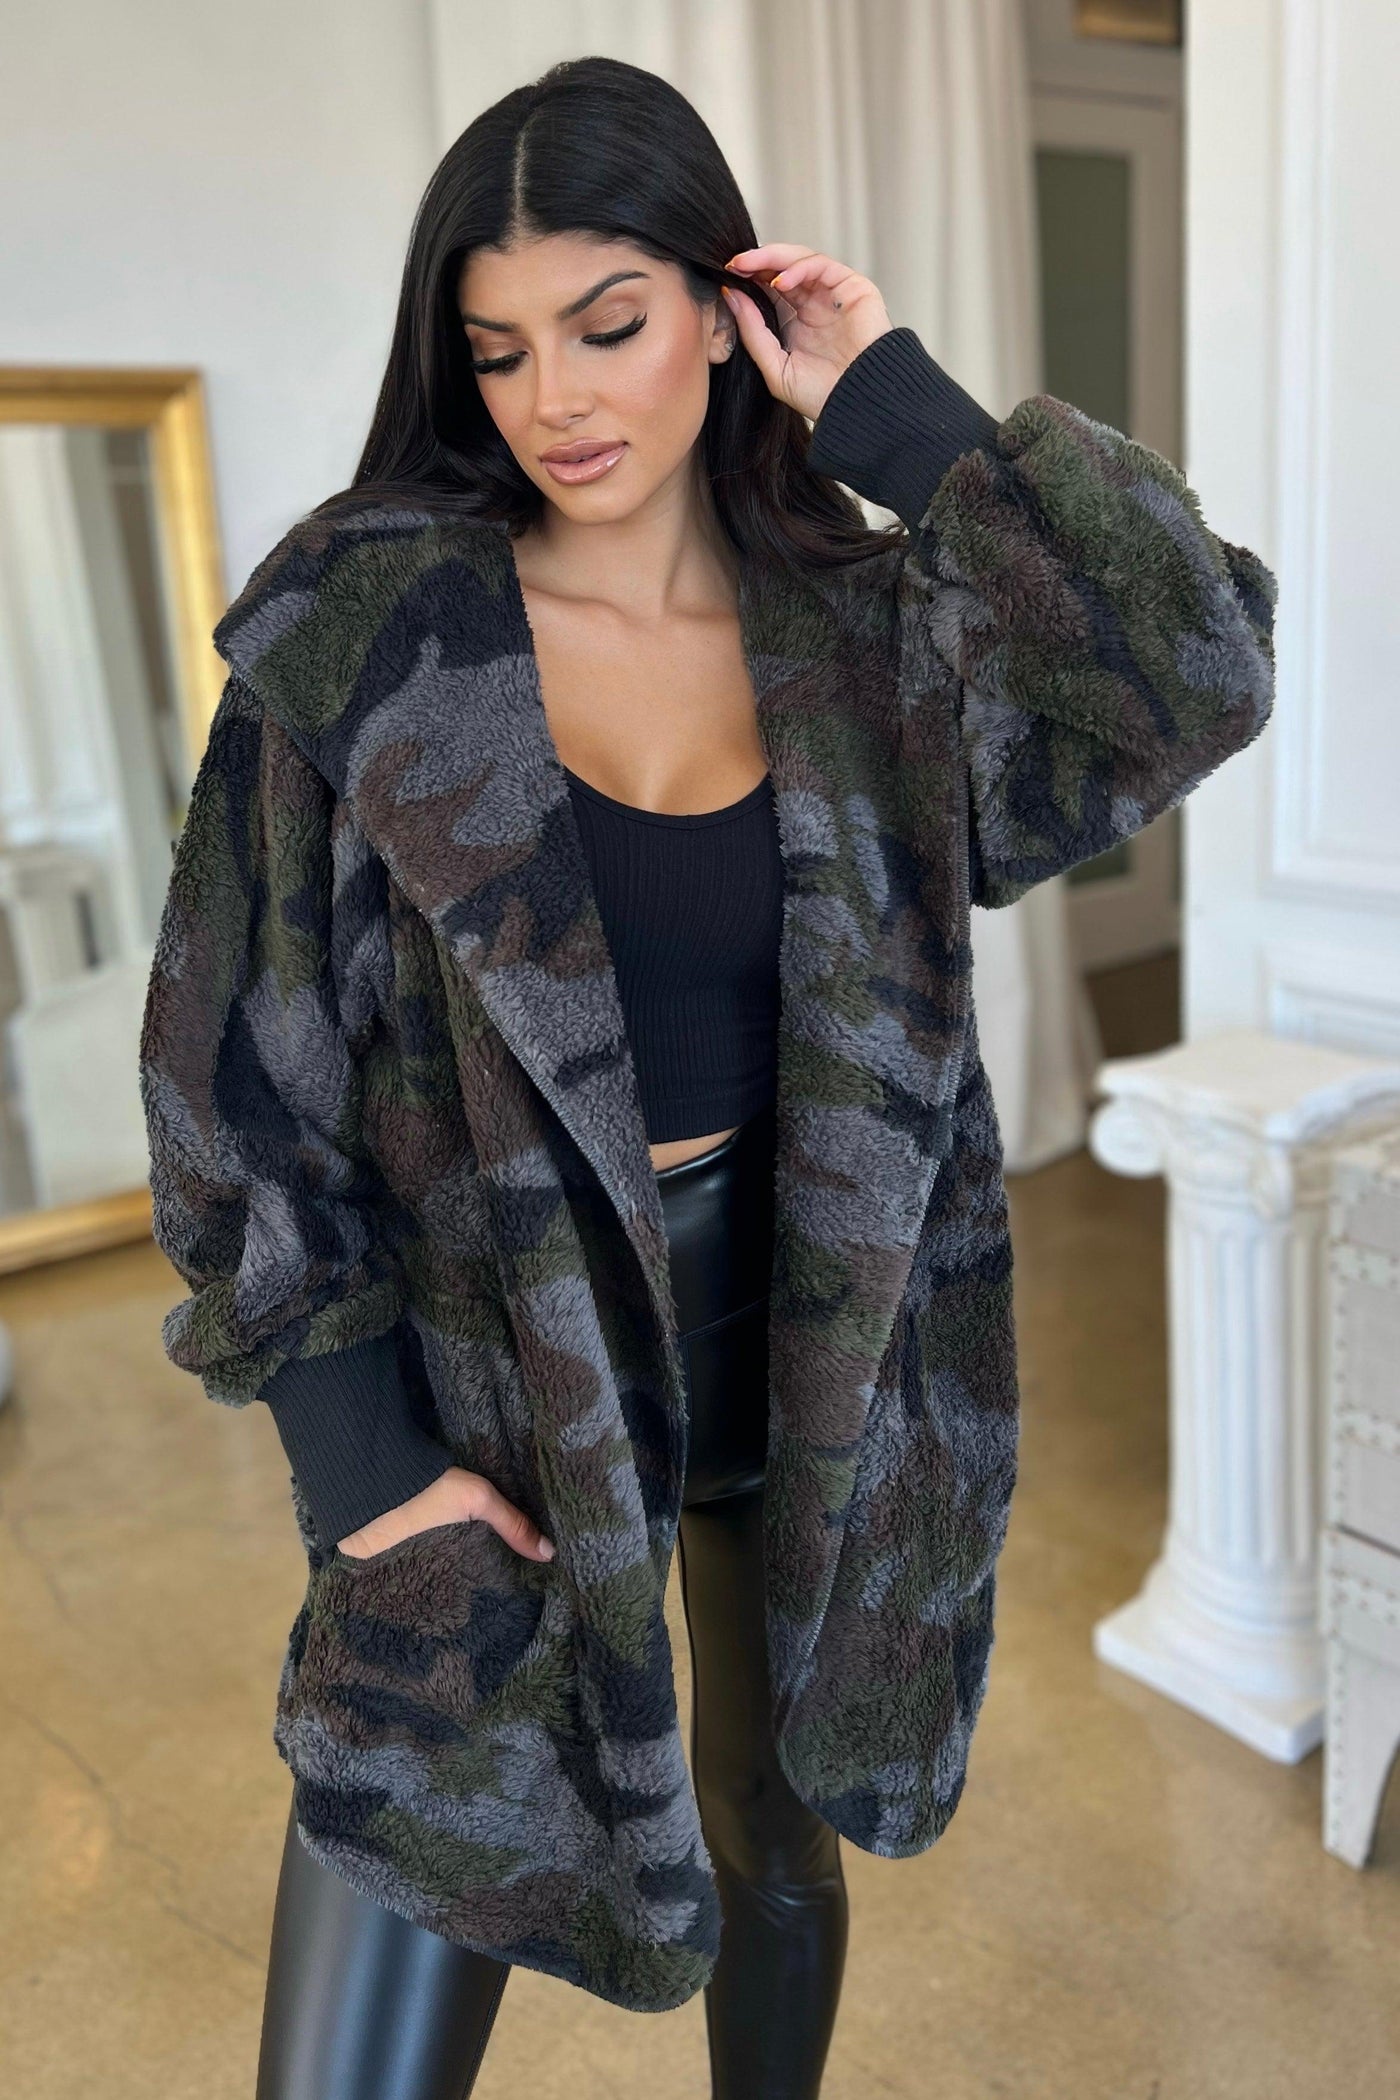 CAMO TEDDY BEAR JACKET , Vests , it’sNOMB. The Label , barefoot dreams jackets, CAMO, CAMOUFLAGE, cozy jackets, FALL, fall jackets, fall sweaters, faux fur, it's nomb the label, ITS NOMB, Its None of My Business, ITSNOMB, ITSNOMBTHELABEL, Jessica Nickson, Maternity Friendly, sweater, sweaters, taupe, TAUPE CARDIGAN, TEDDY BEAR, TEDDY BEAR JACKET, teddy bear jackets, winter jackets , It's NOMB , itsnomb.com